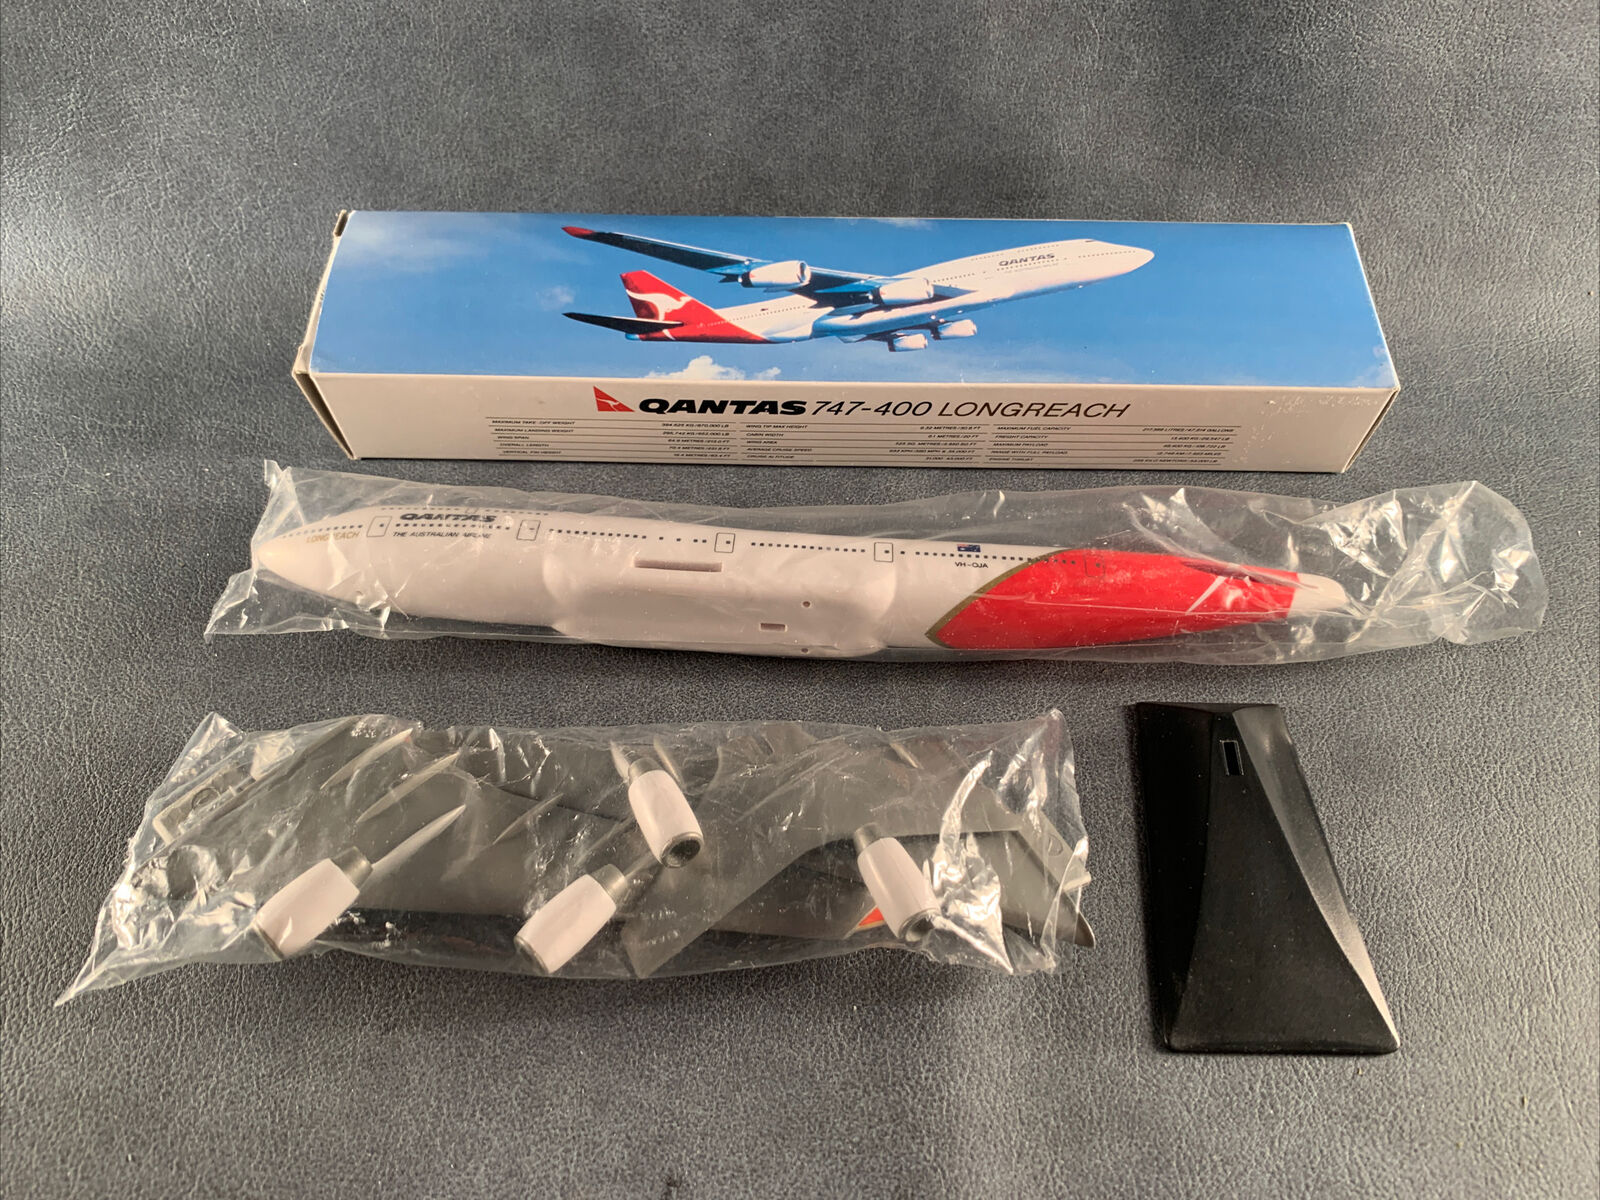 Qantas Airlines 747-400 Longreach Model Airplane Kit In Box 1:200 Scale